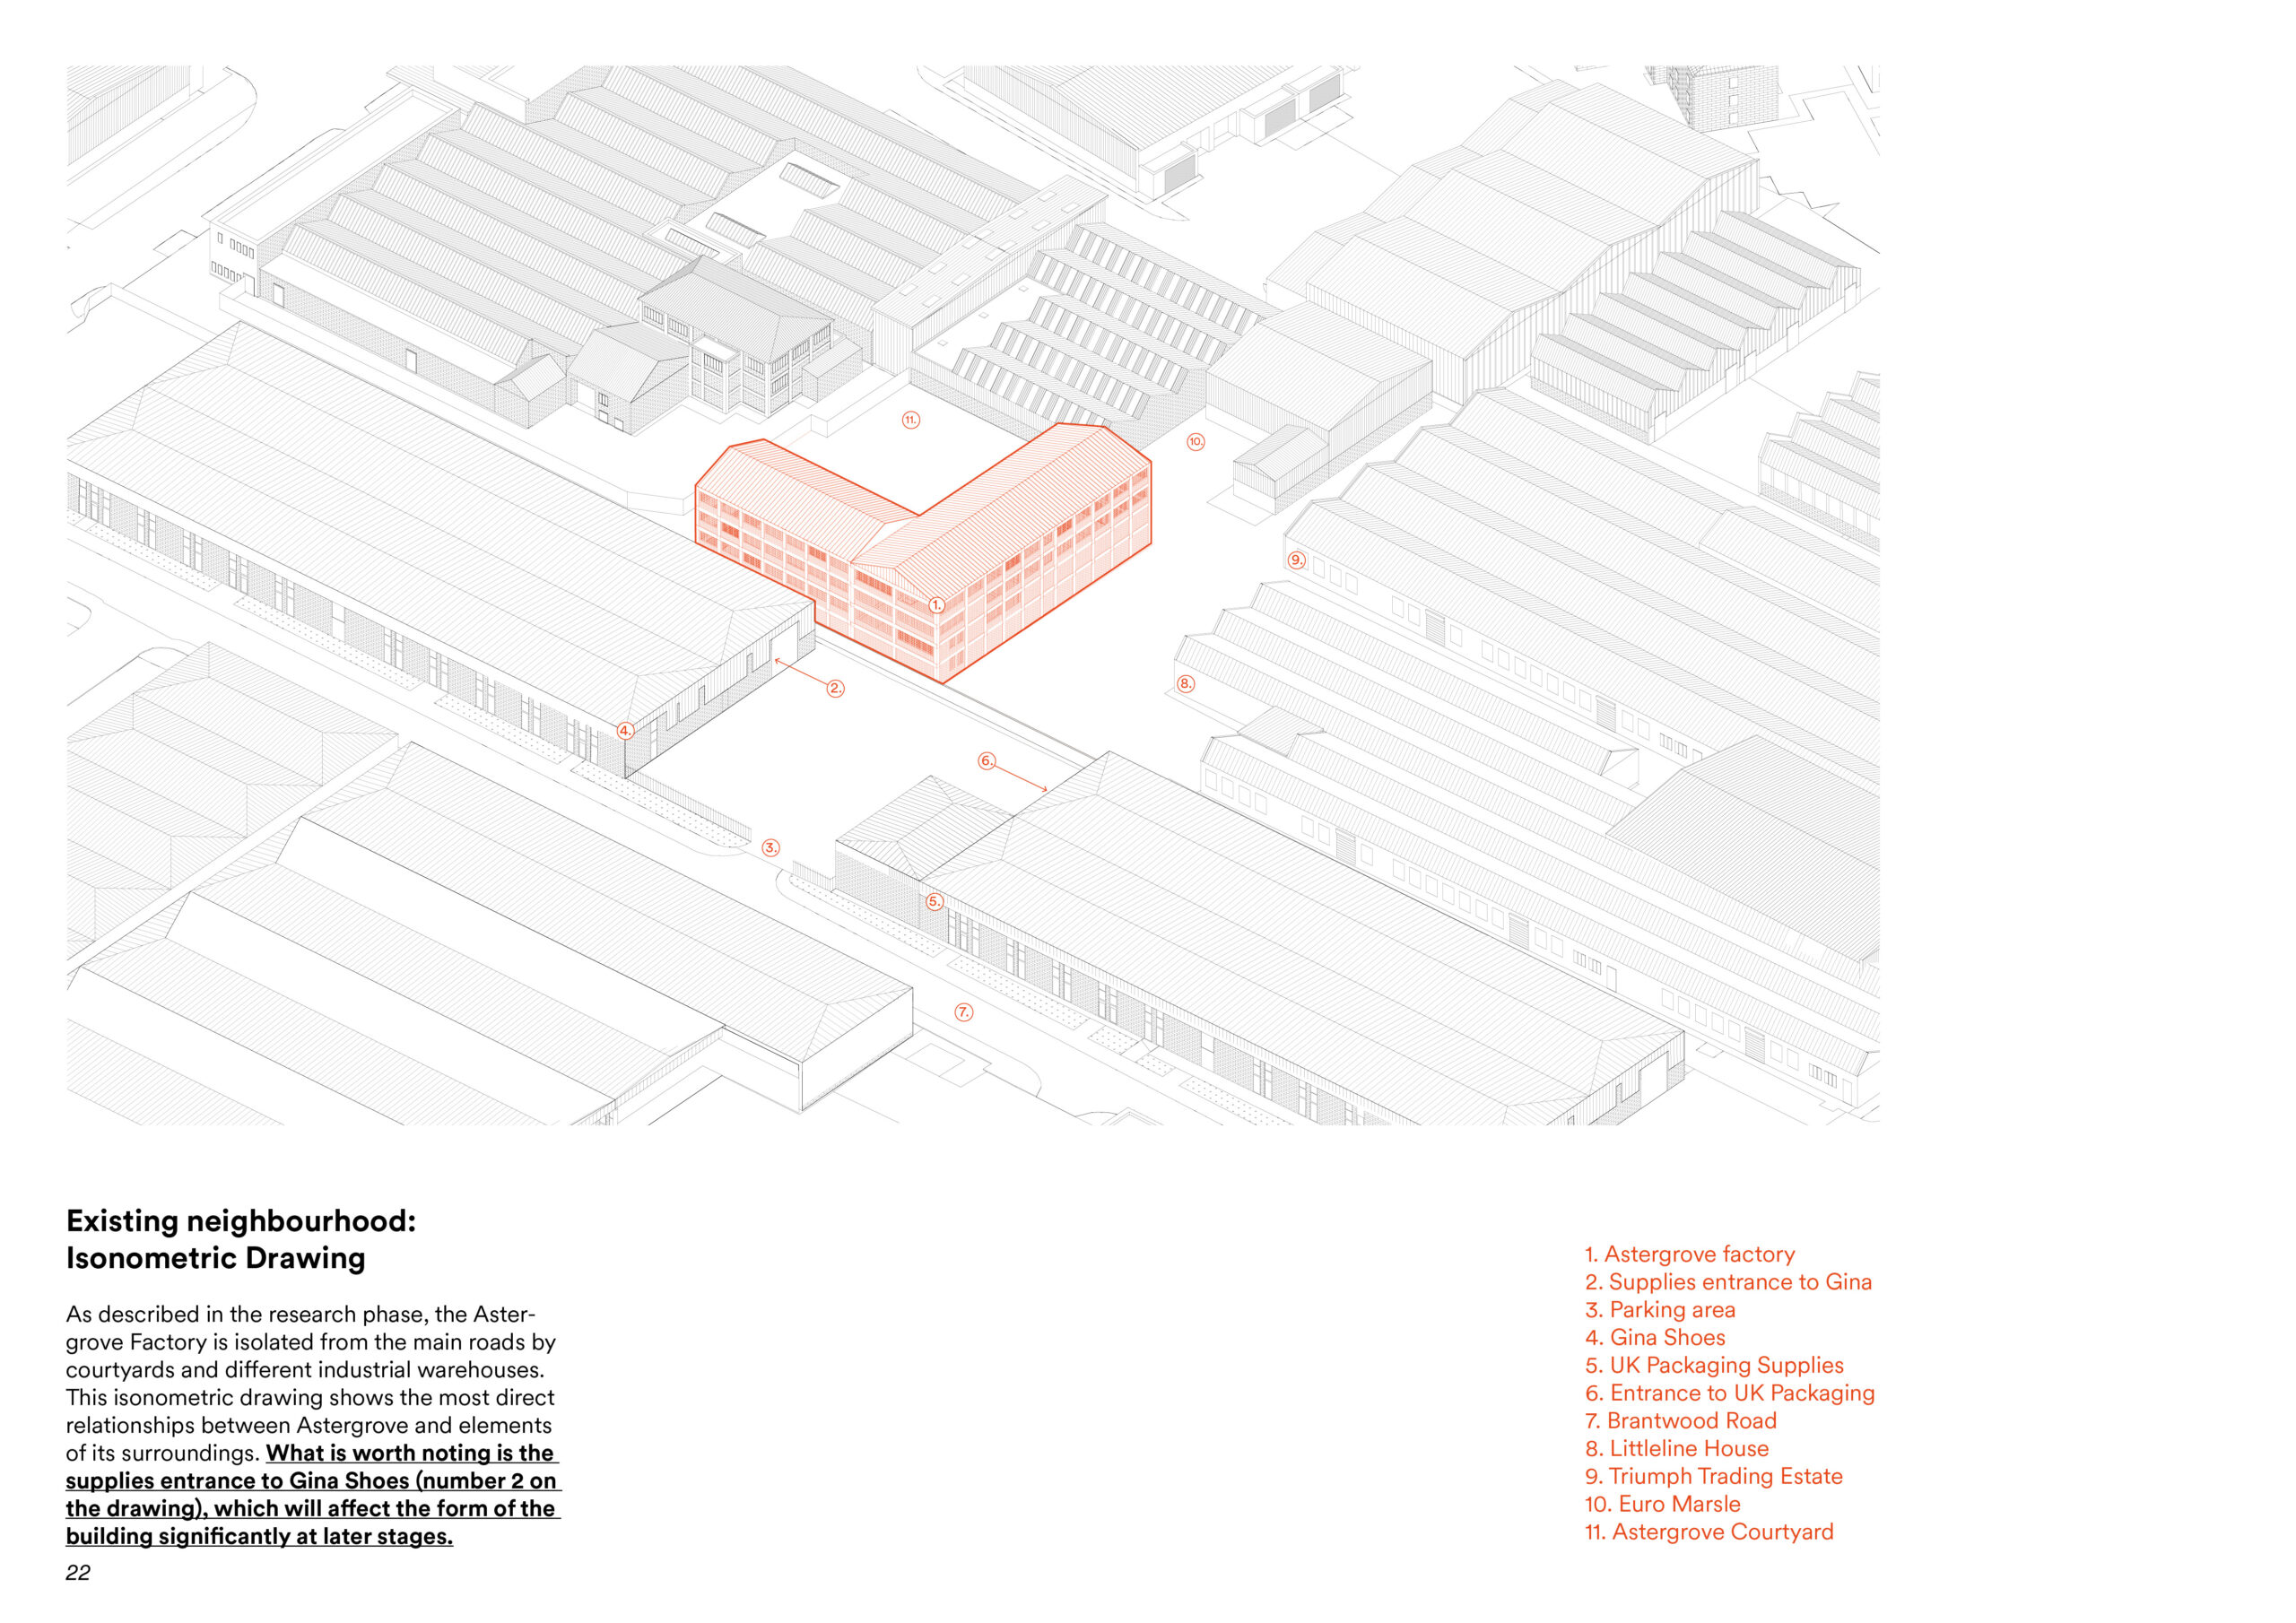 isometric drawing with the original building drawn in orange. the rest of the drawing is cad black and white